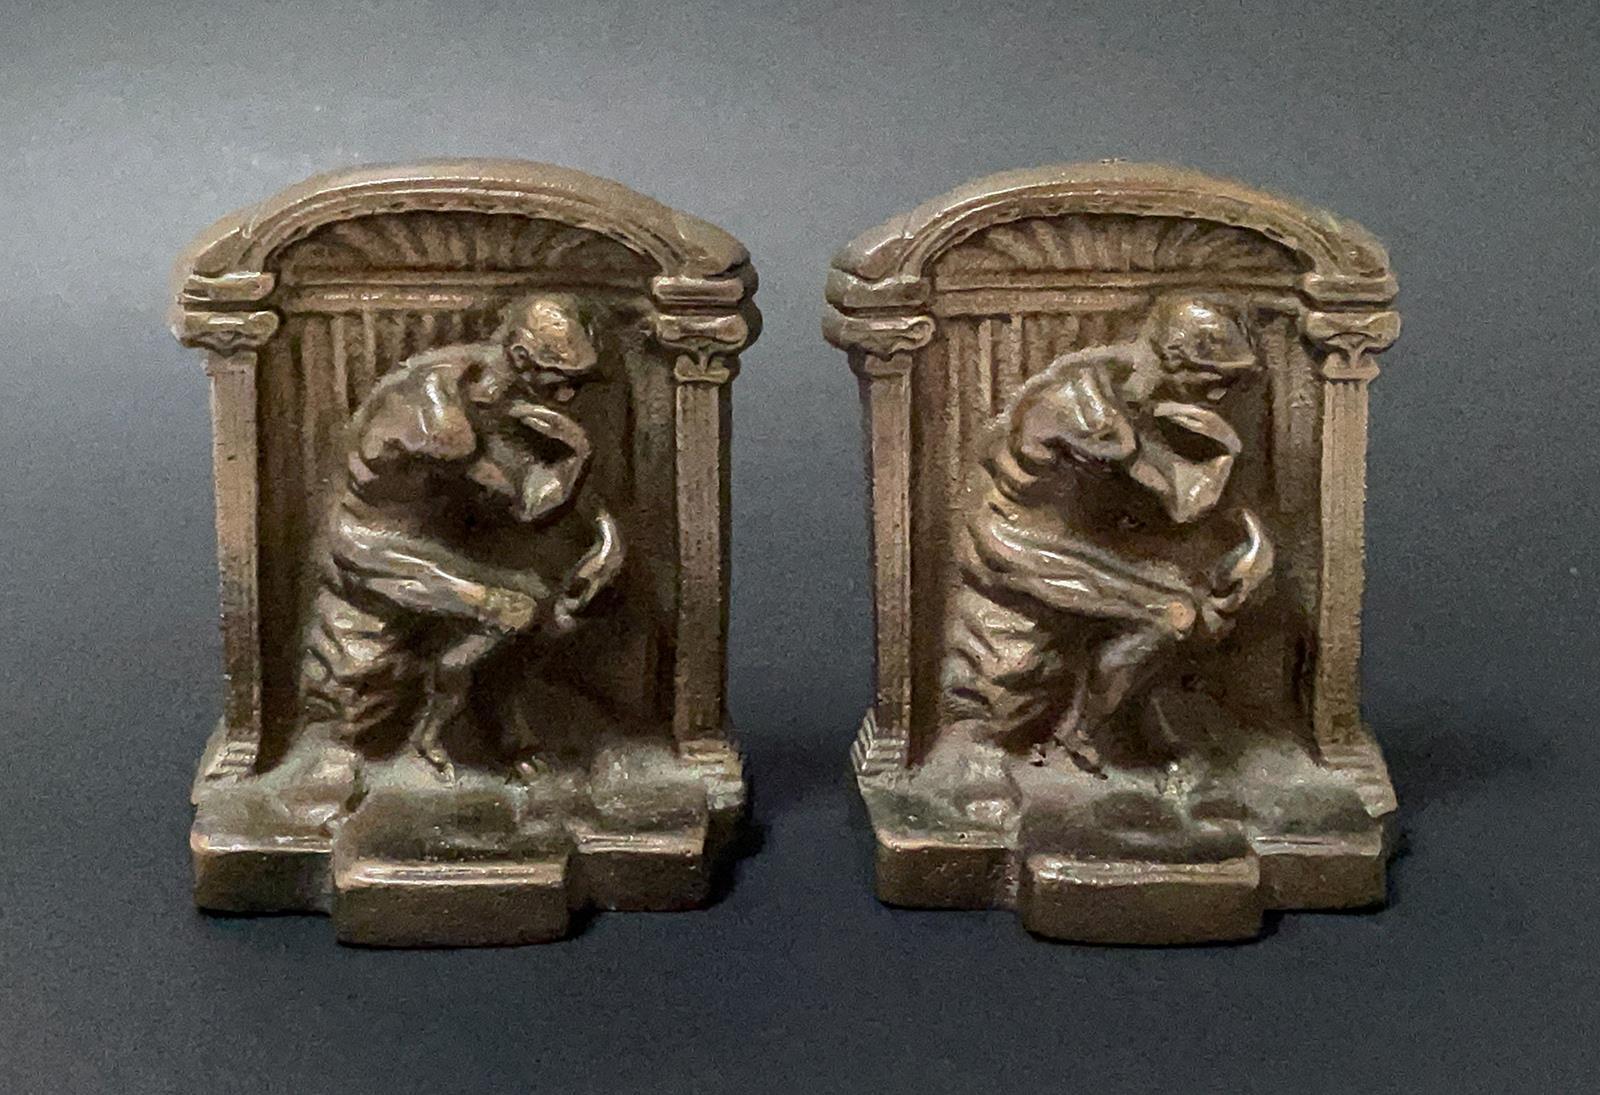 ANTIQUE BRONZE THE THINKER BOOKENDS AUGUSTE RODIN'S THINKING NUDE MAN SCULPTURE